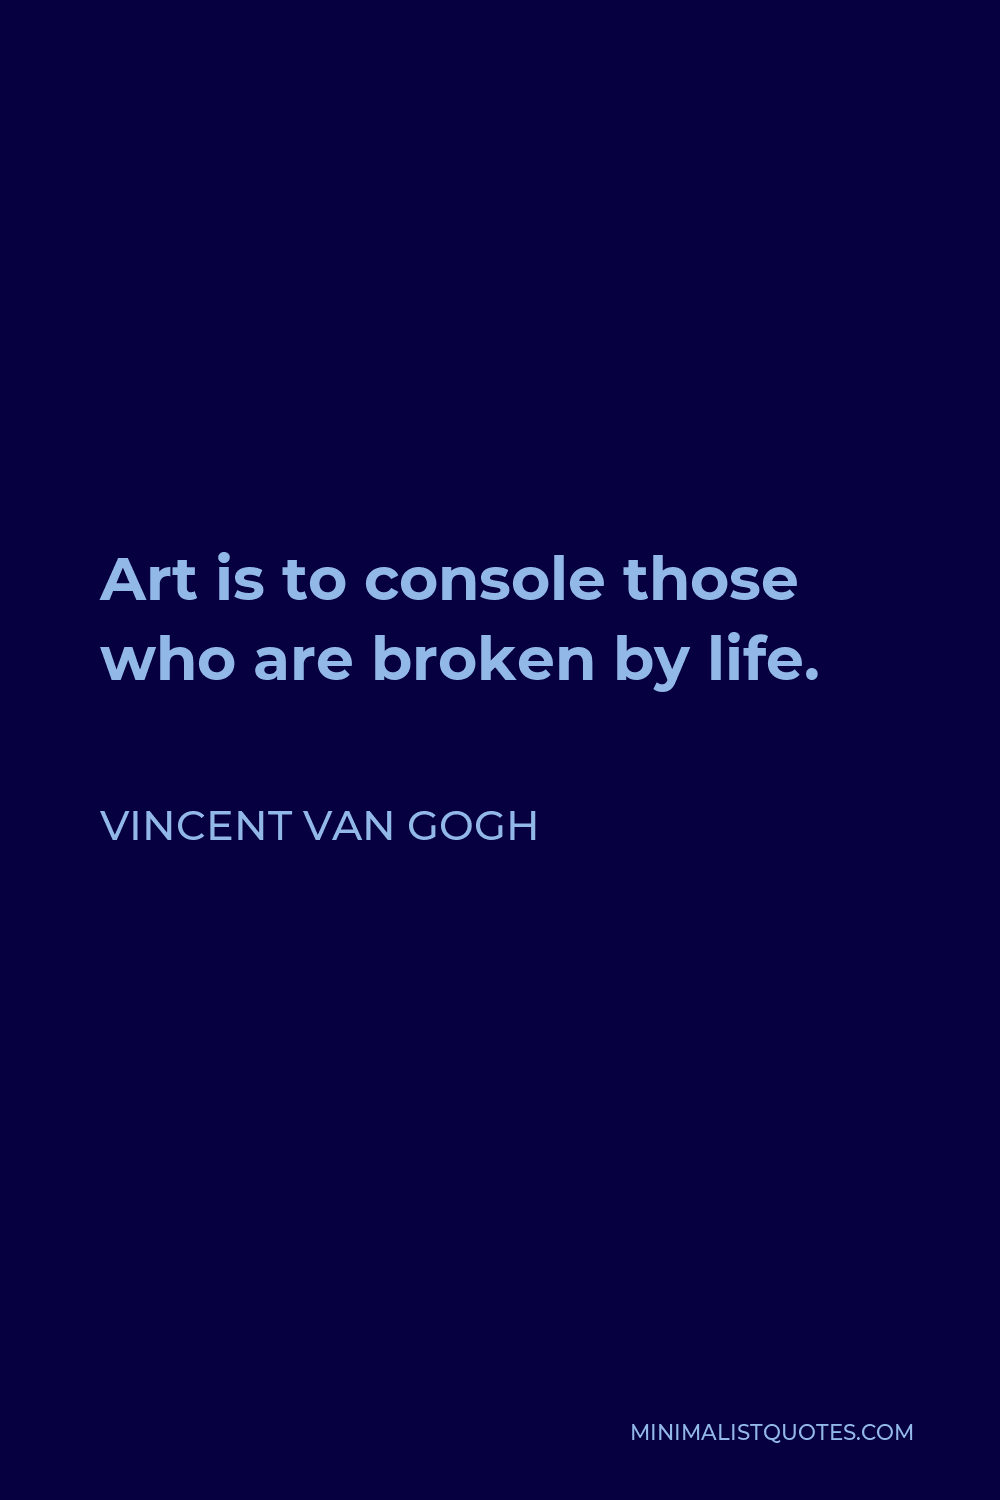 Vincent Van Gogh Quote - Art is to console those who are broken by life.